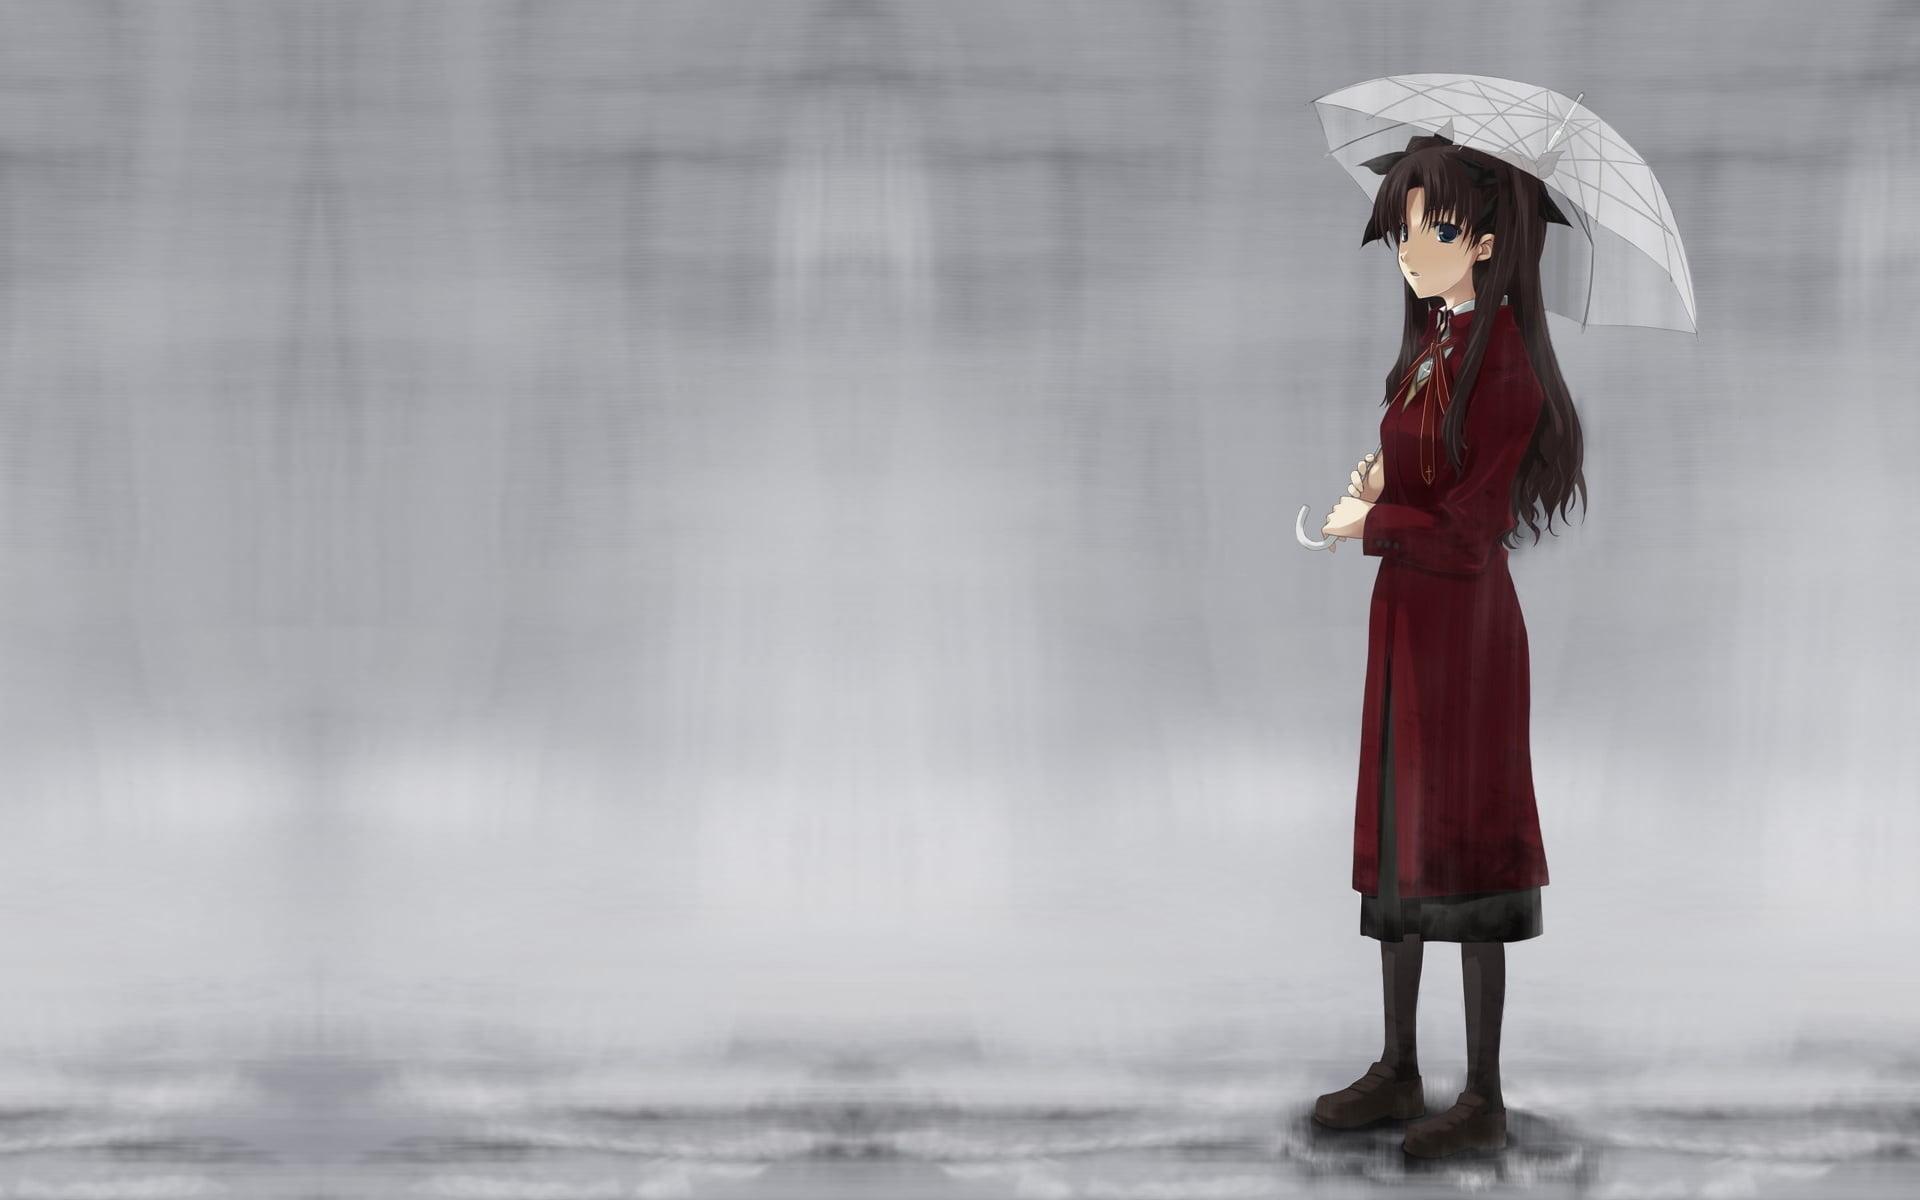 Maroon haired woman in red long coat female anime character